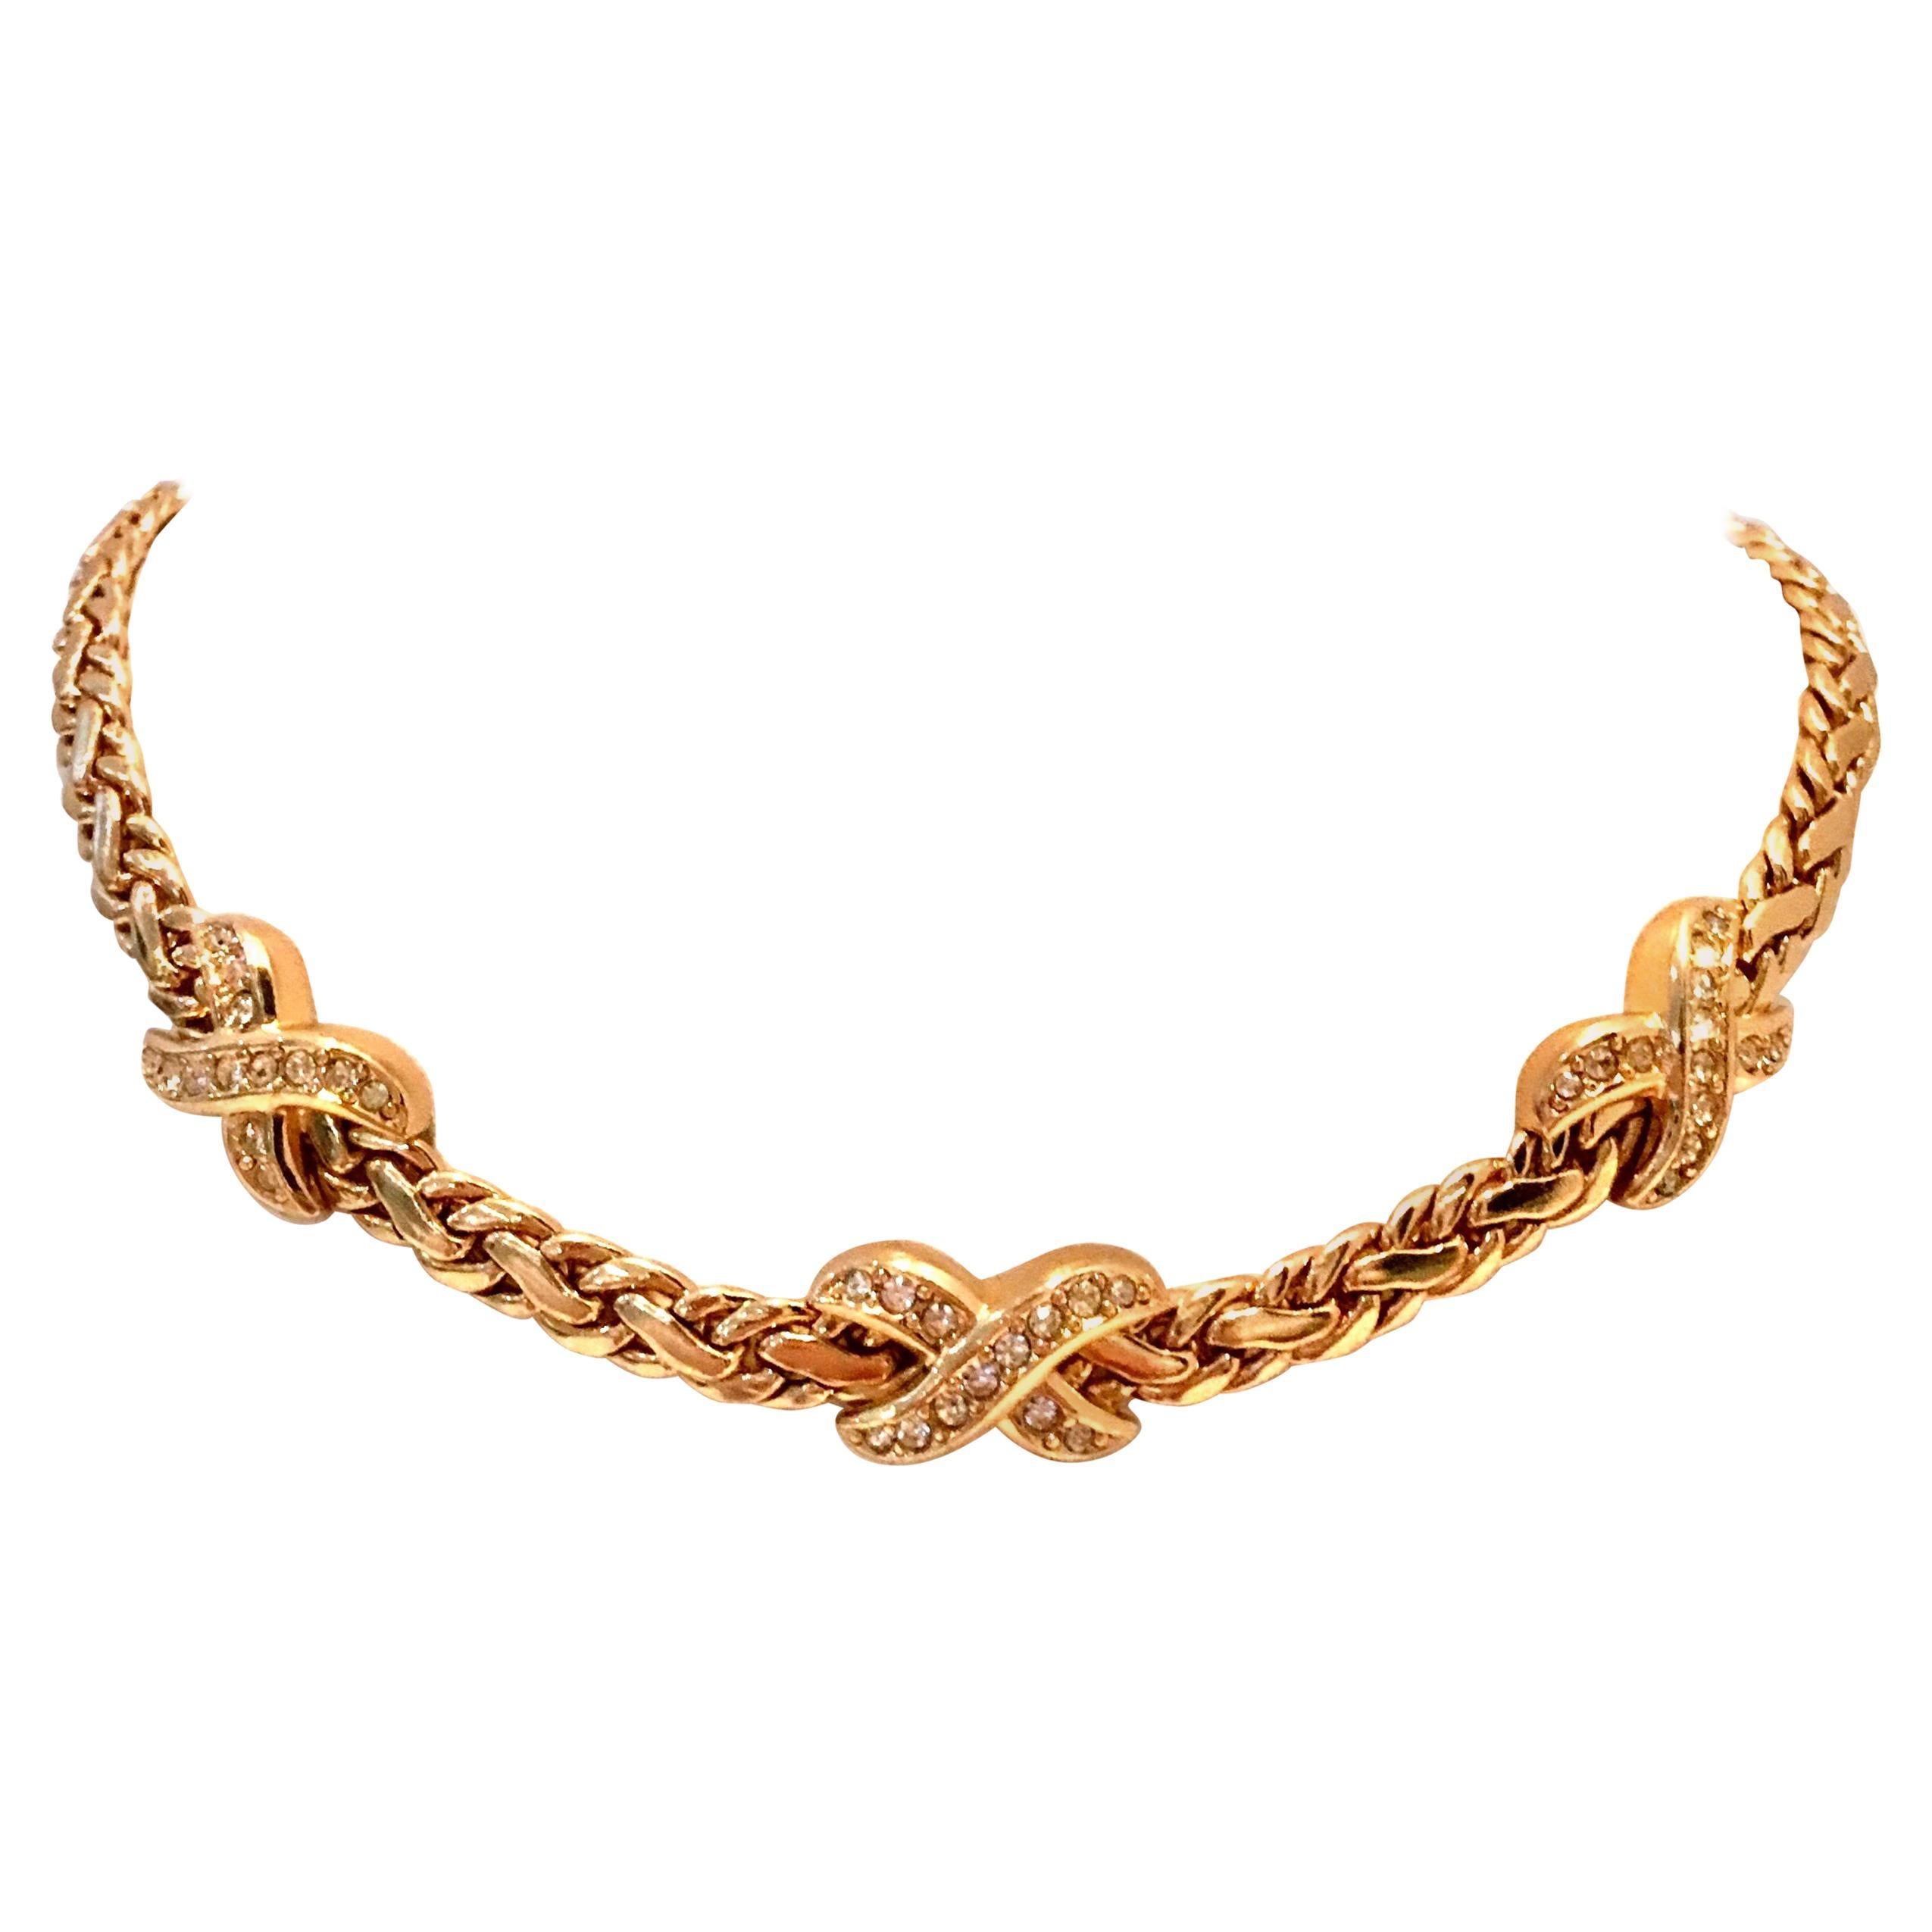 20th Century Gold & Swaorovski Crystal Choker Style Necklace By, Christian Dior